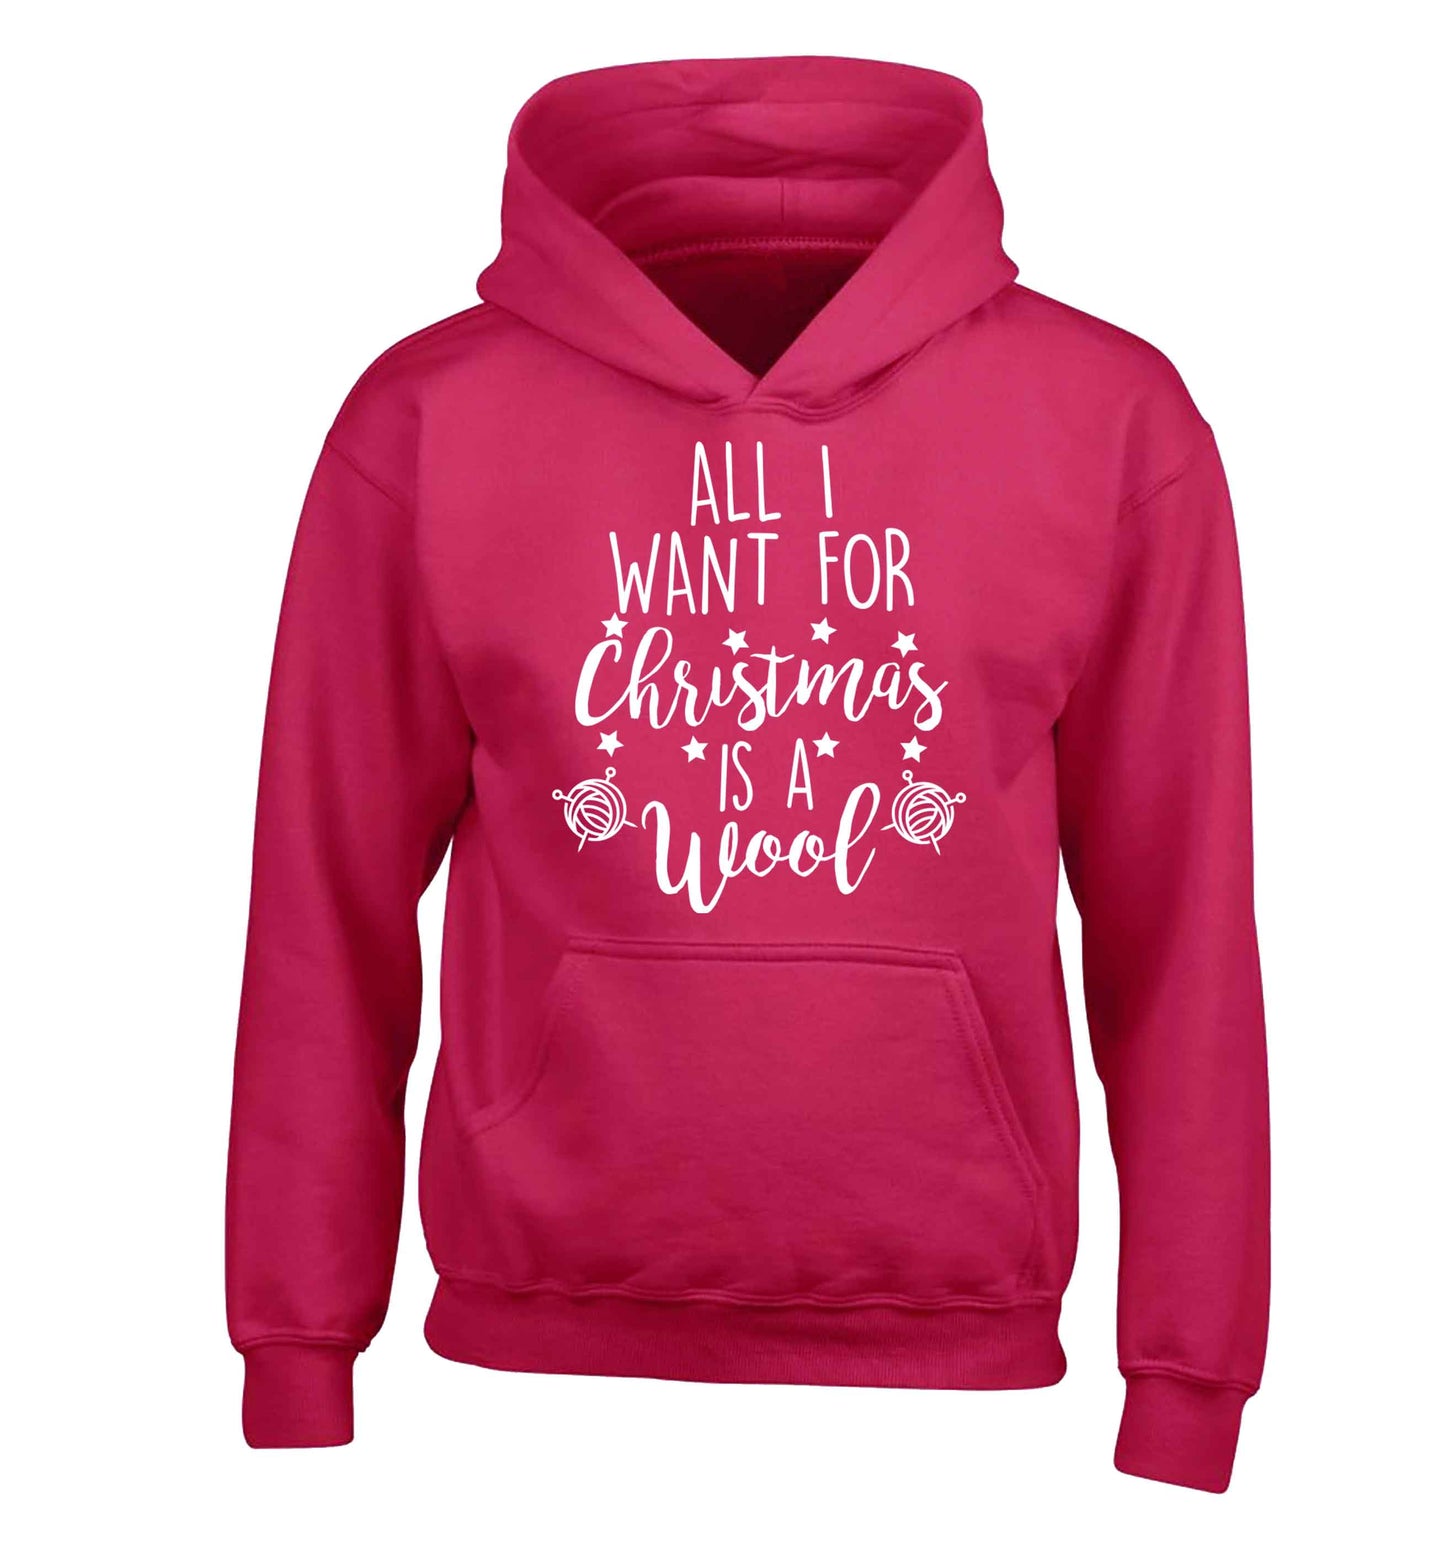 All I want for Christmas is wool! children's pink hoodie 12-13 Years